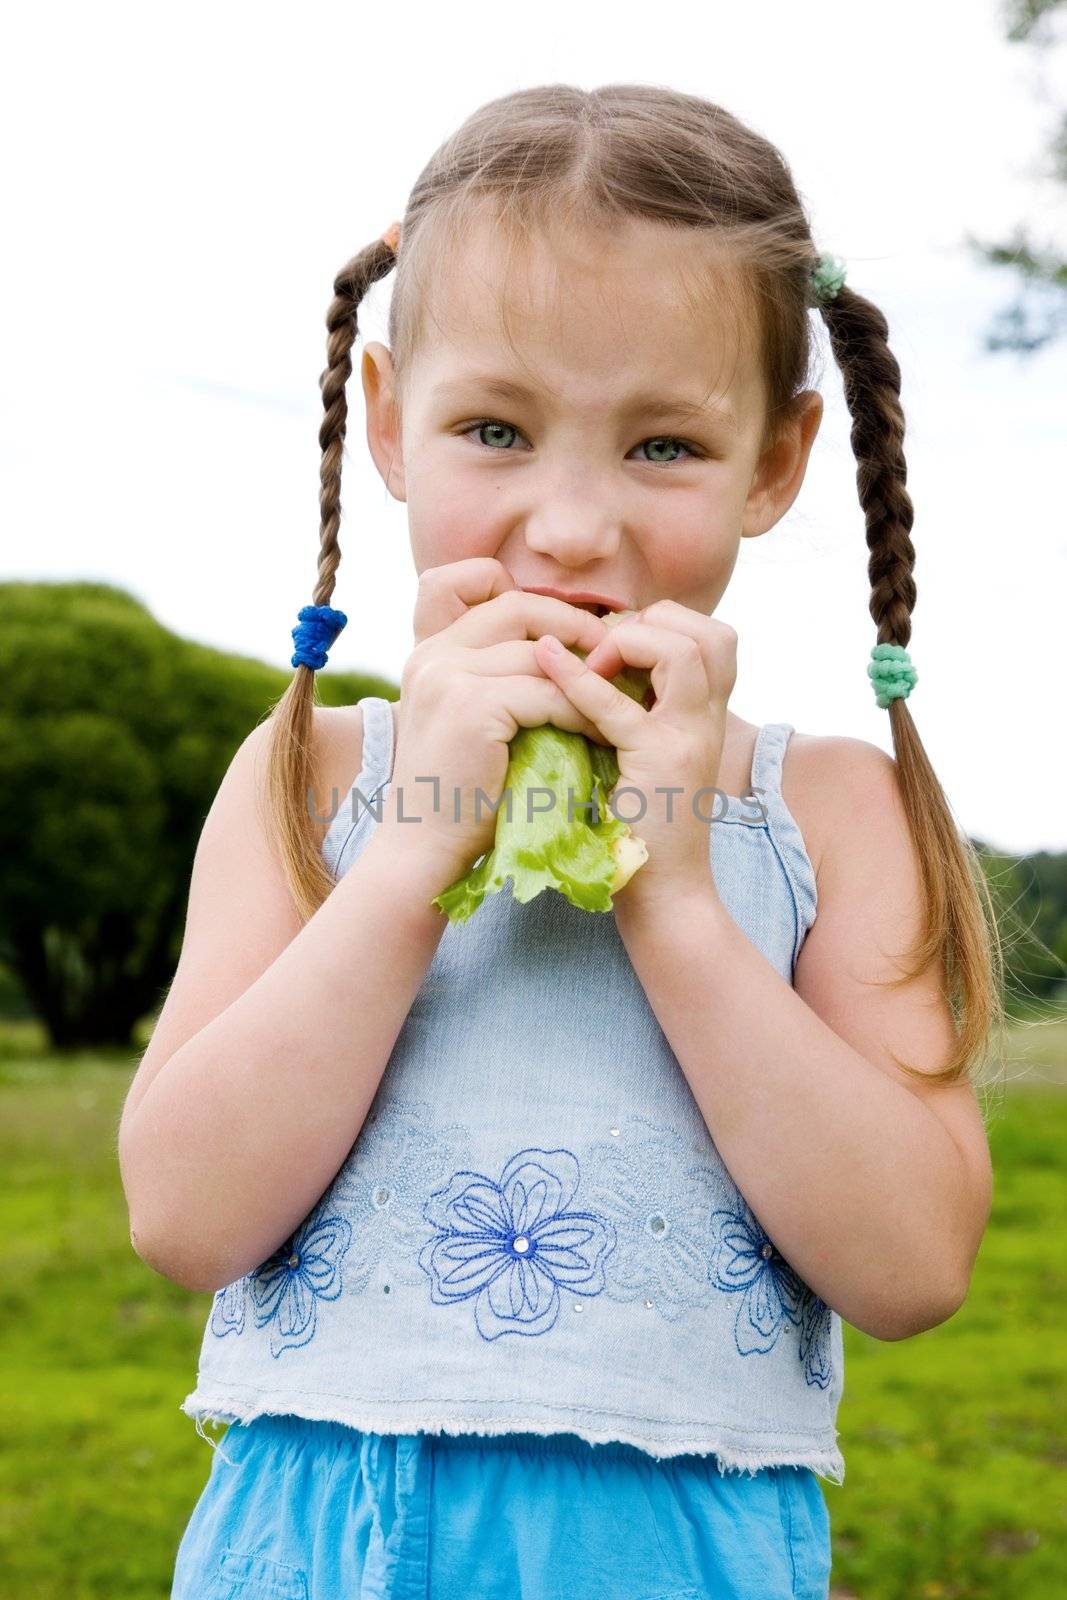 Young girl eating lettuce
